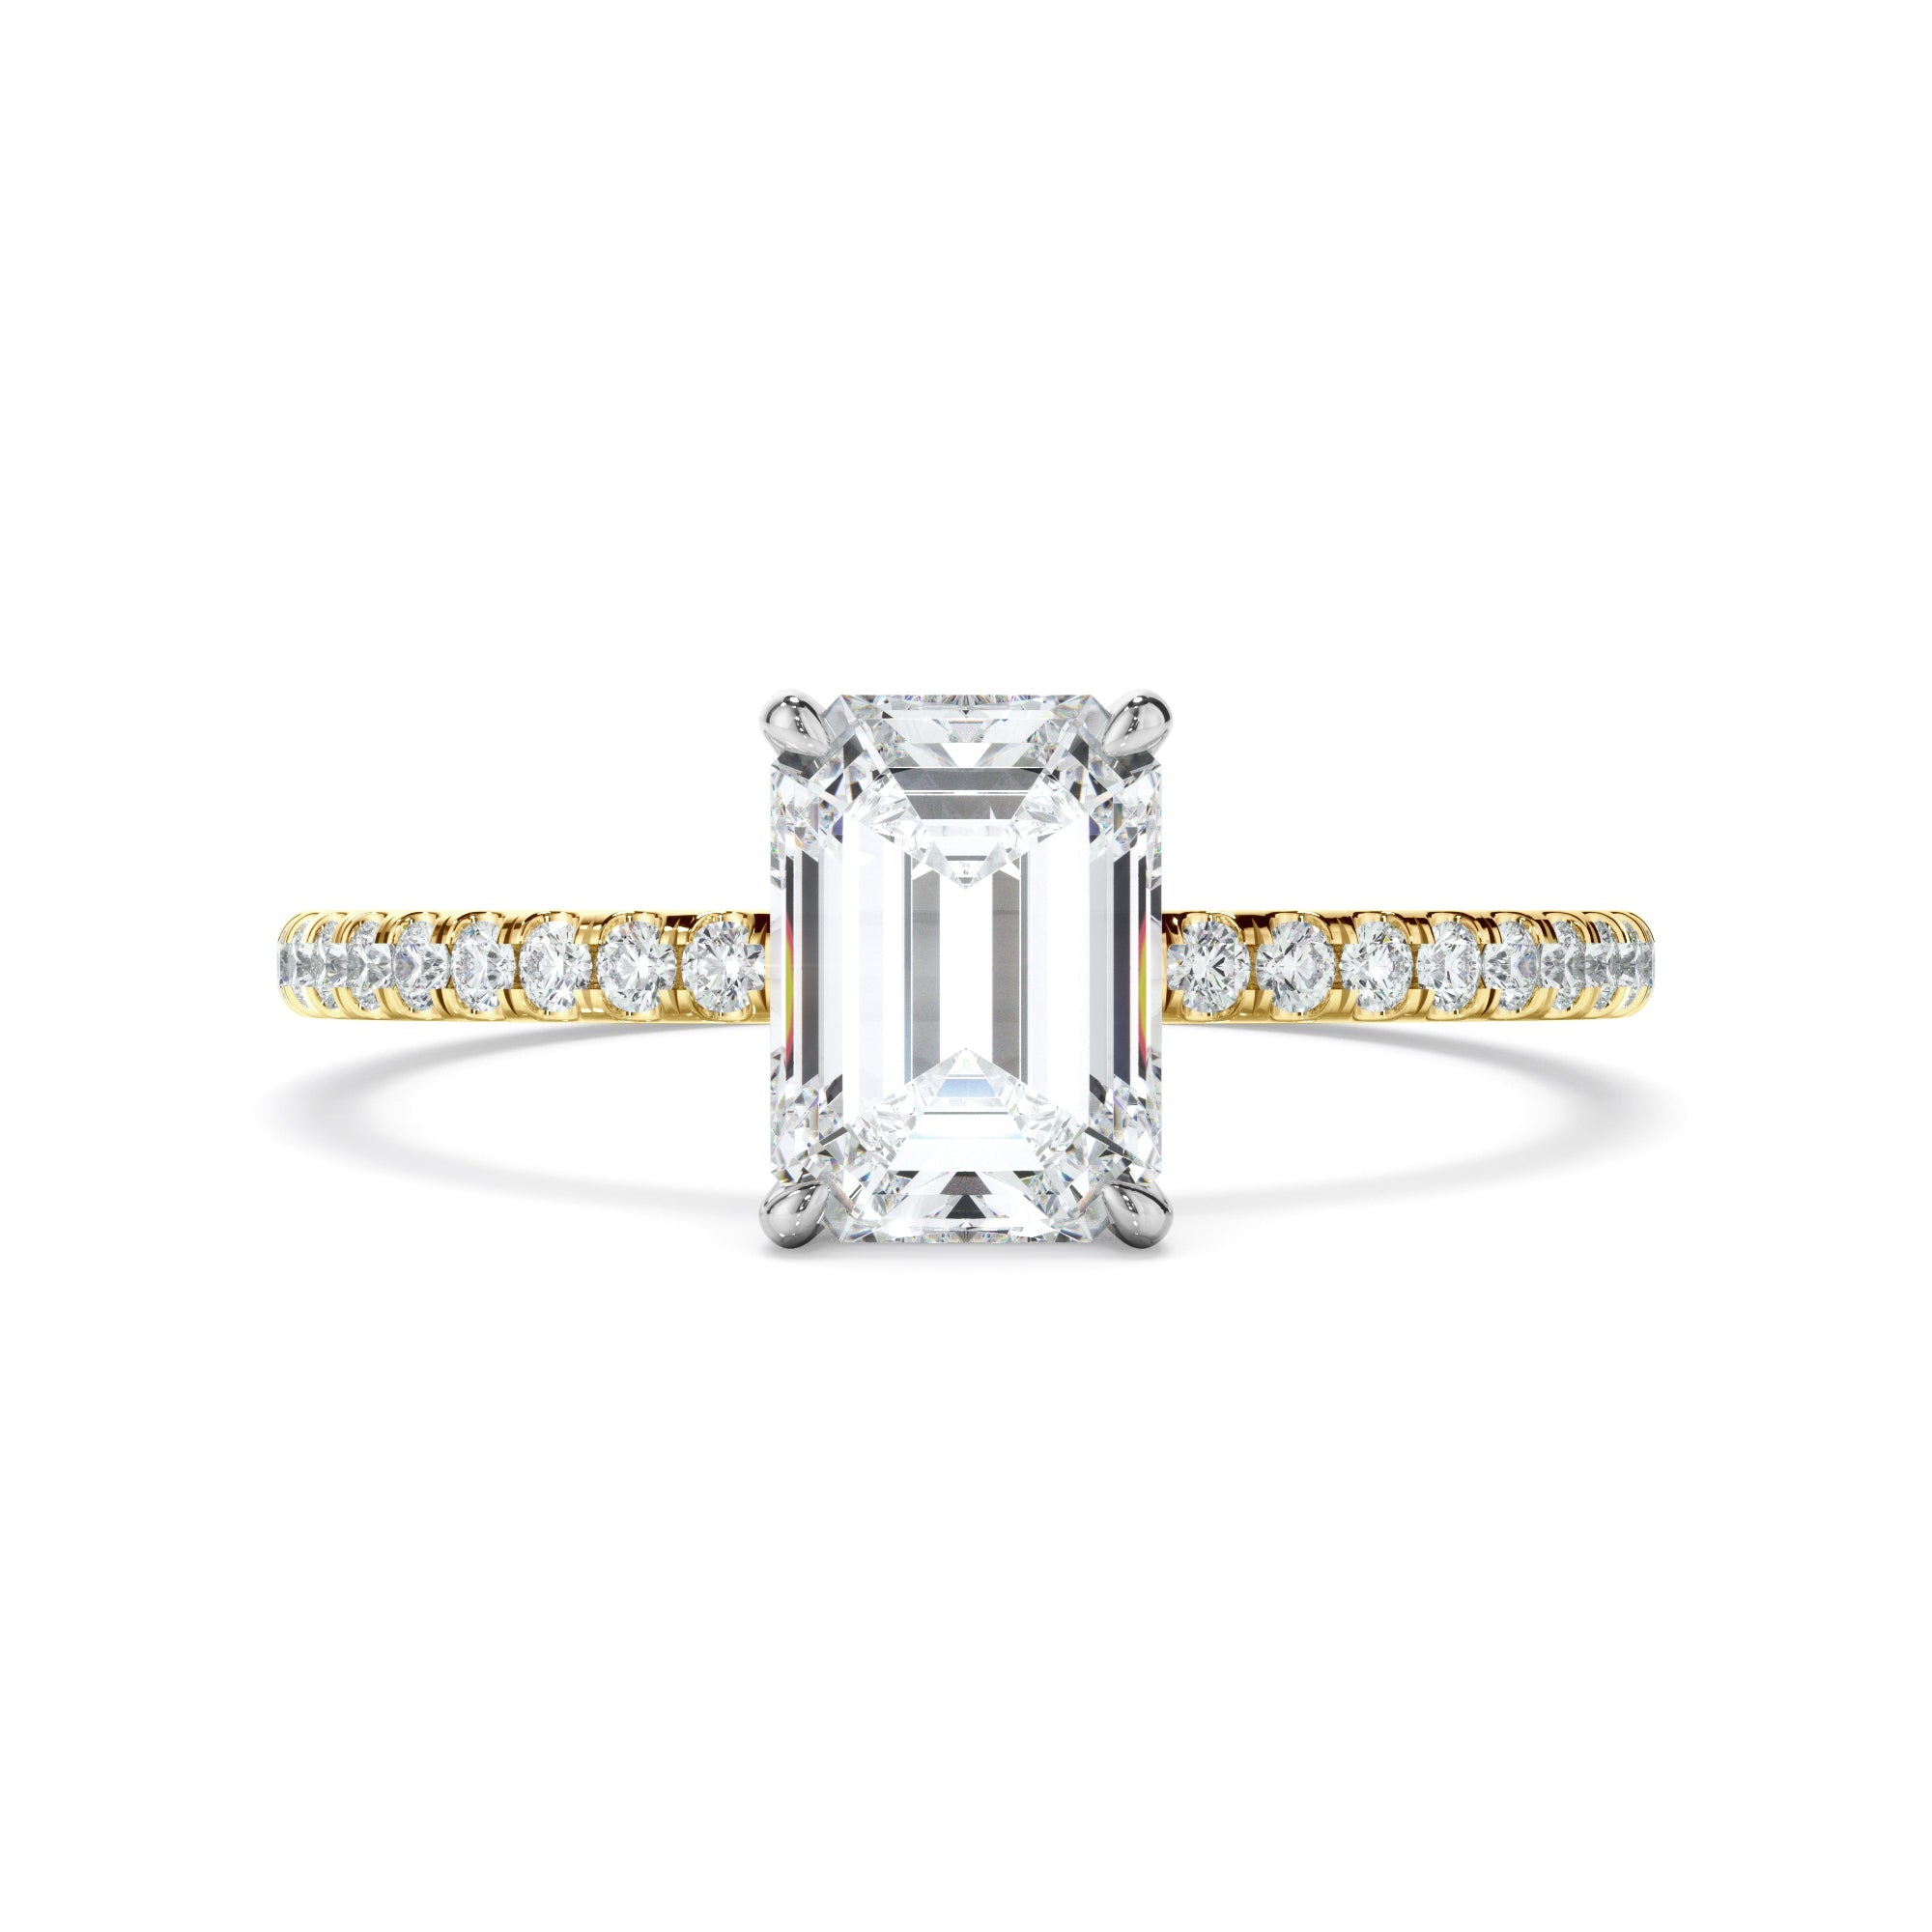 Emerald Cut Diamond Solitaire Engagement Ring With Pave Band